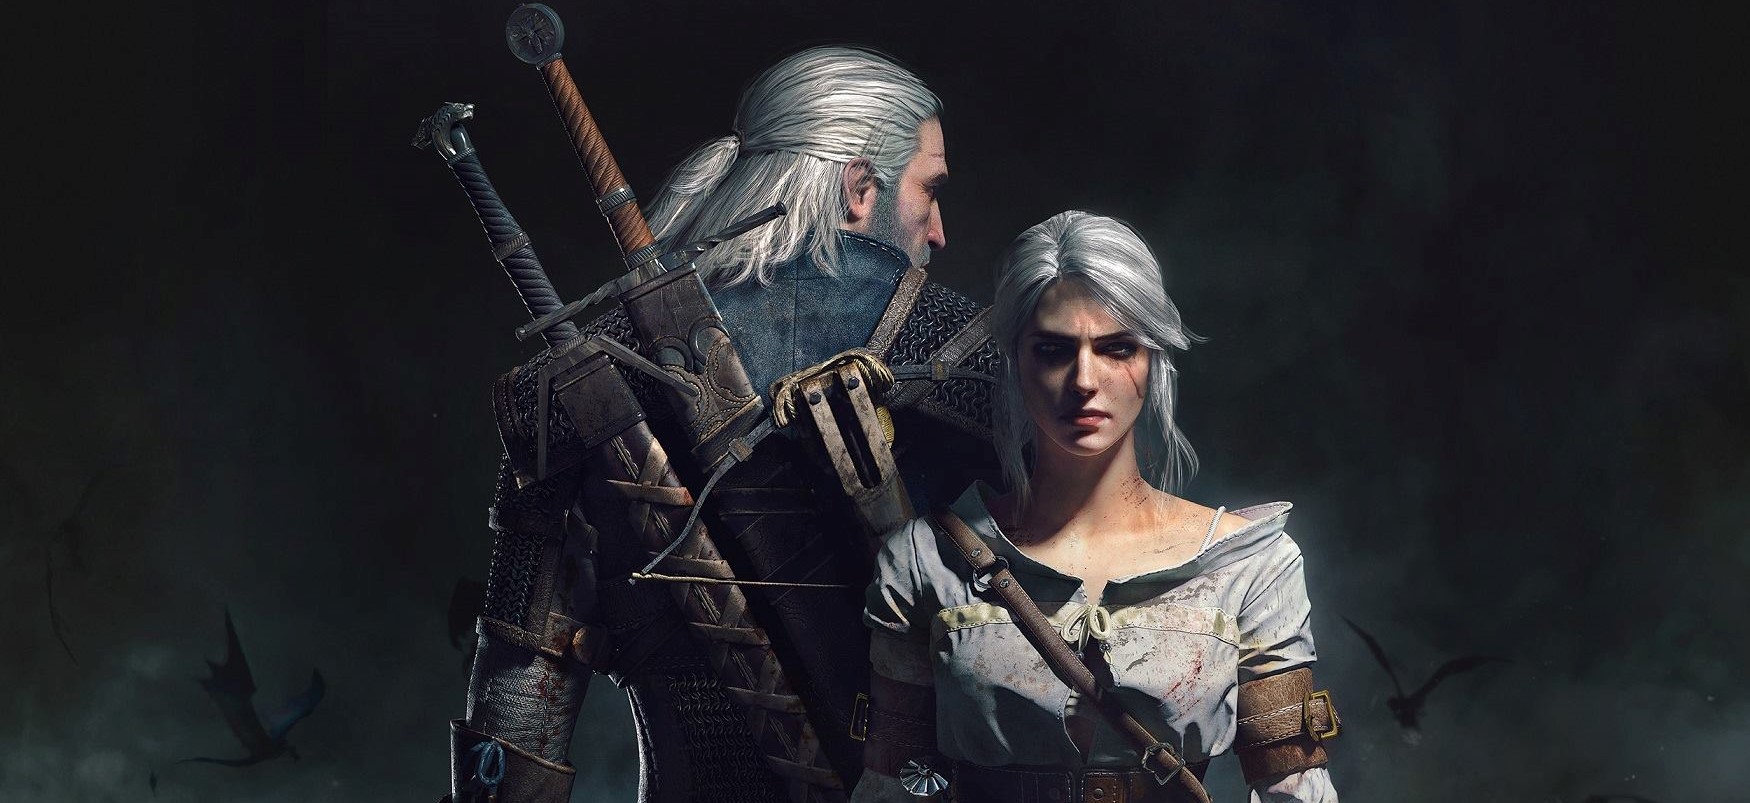 Promo art for The Witcher 3